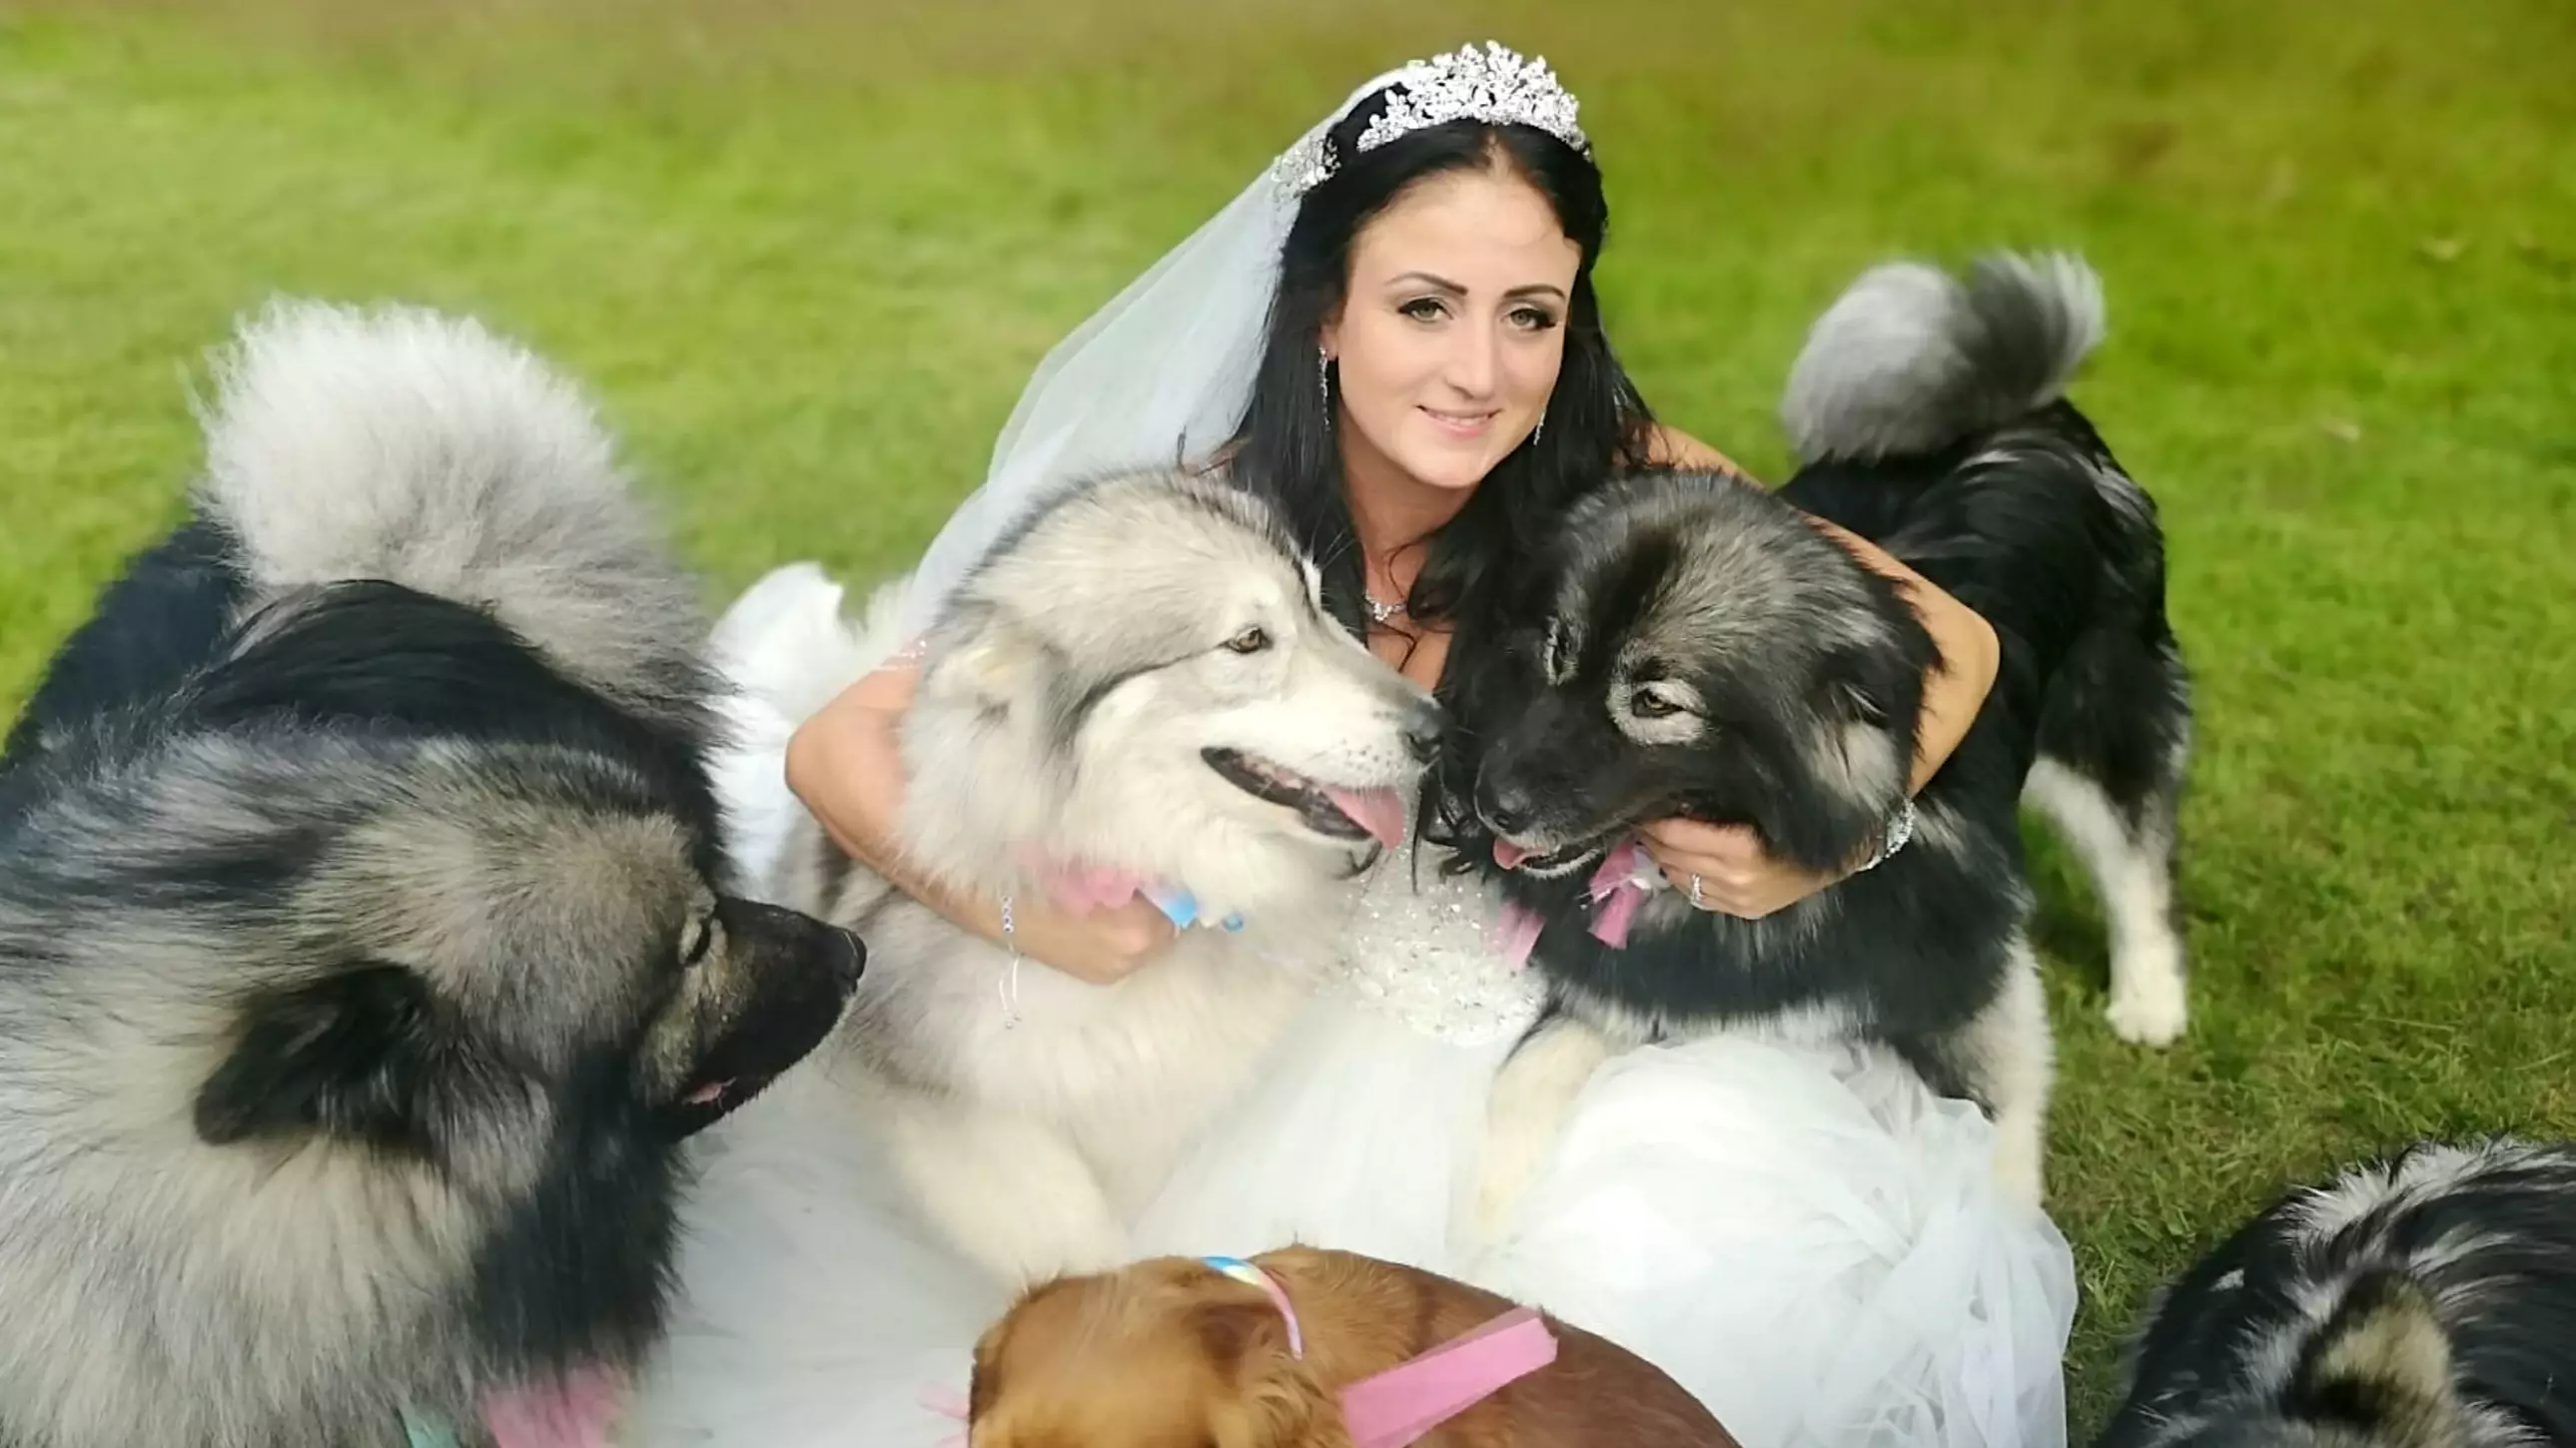 Animal-Loving Couple Have A Dozen Dogs And Two Horses At Their Wedding